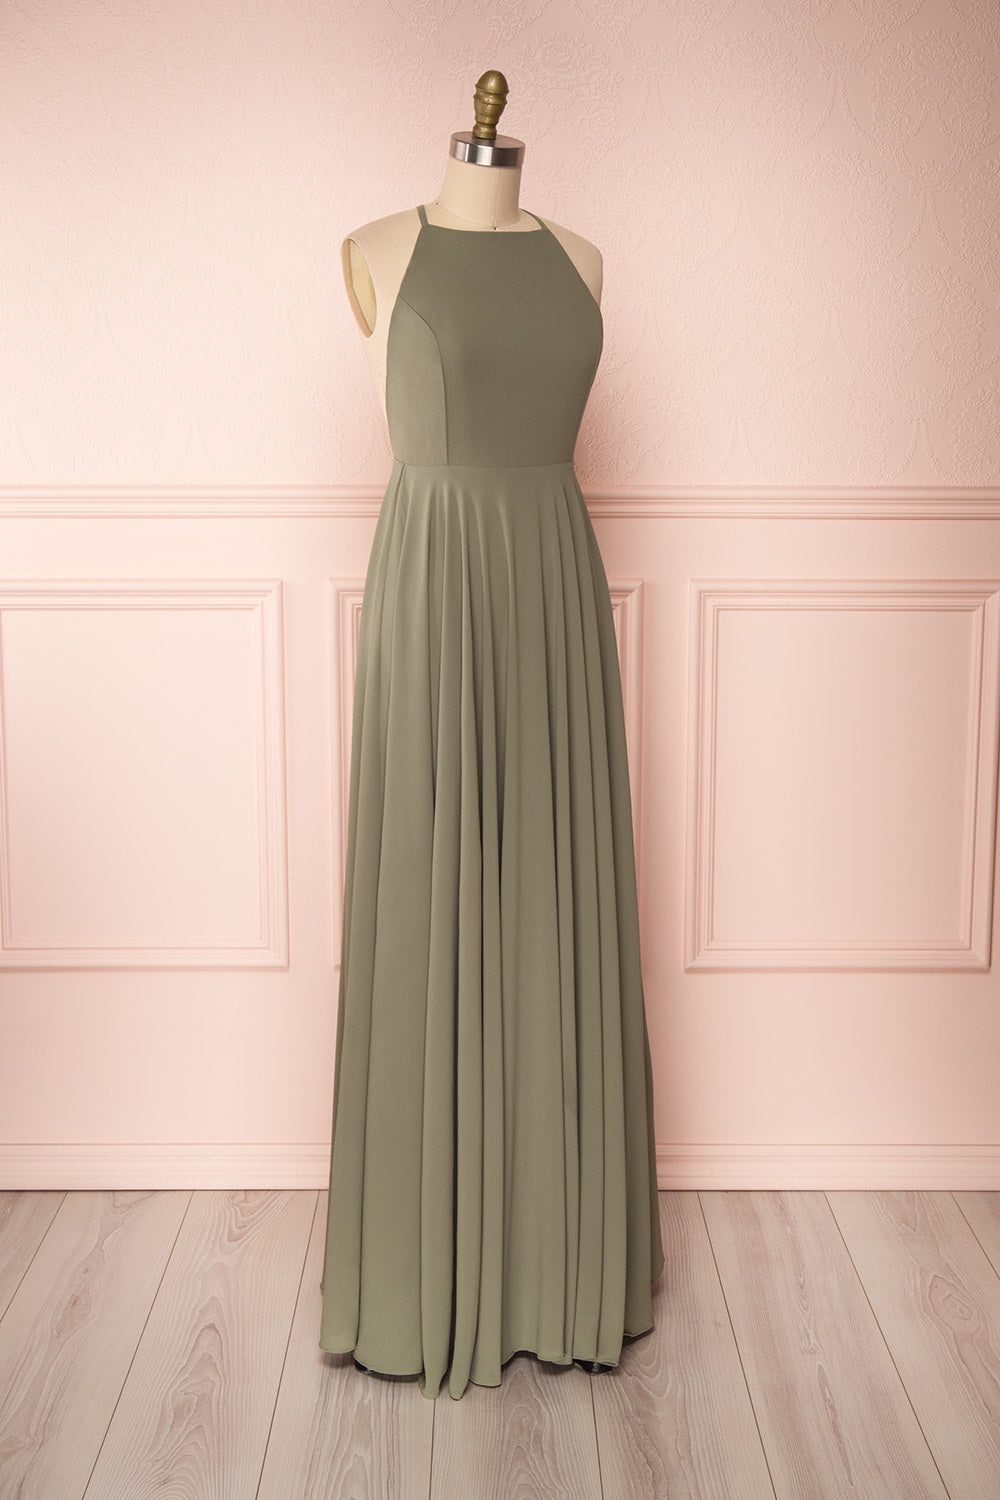 Shaynez Sage Green Empire A-Line Prom Dress side view | Boutique 1861